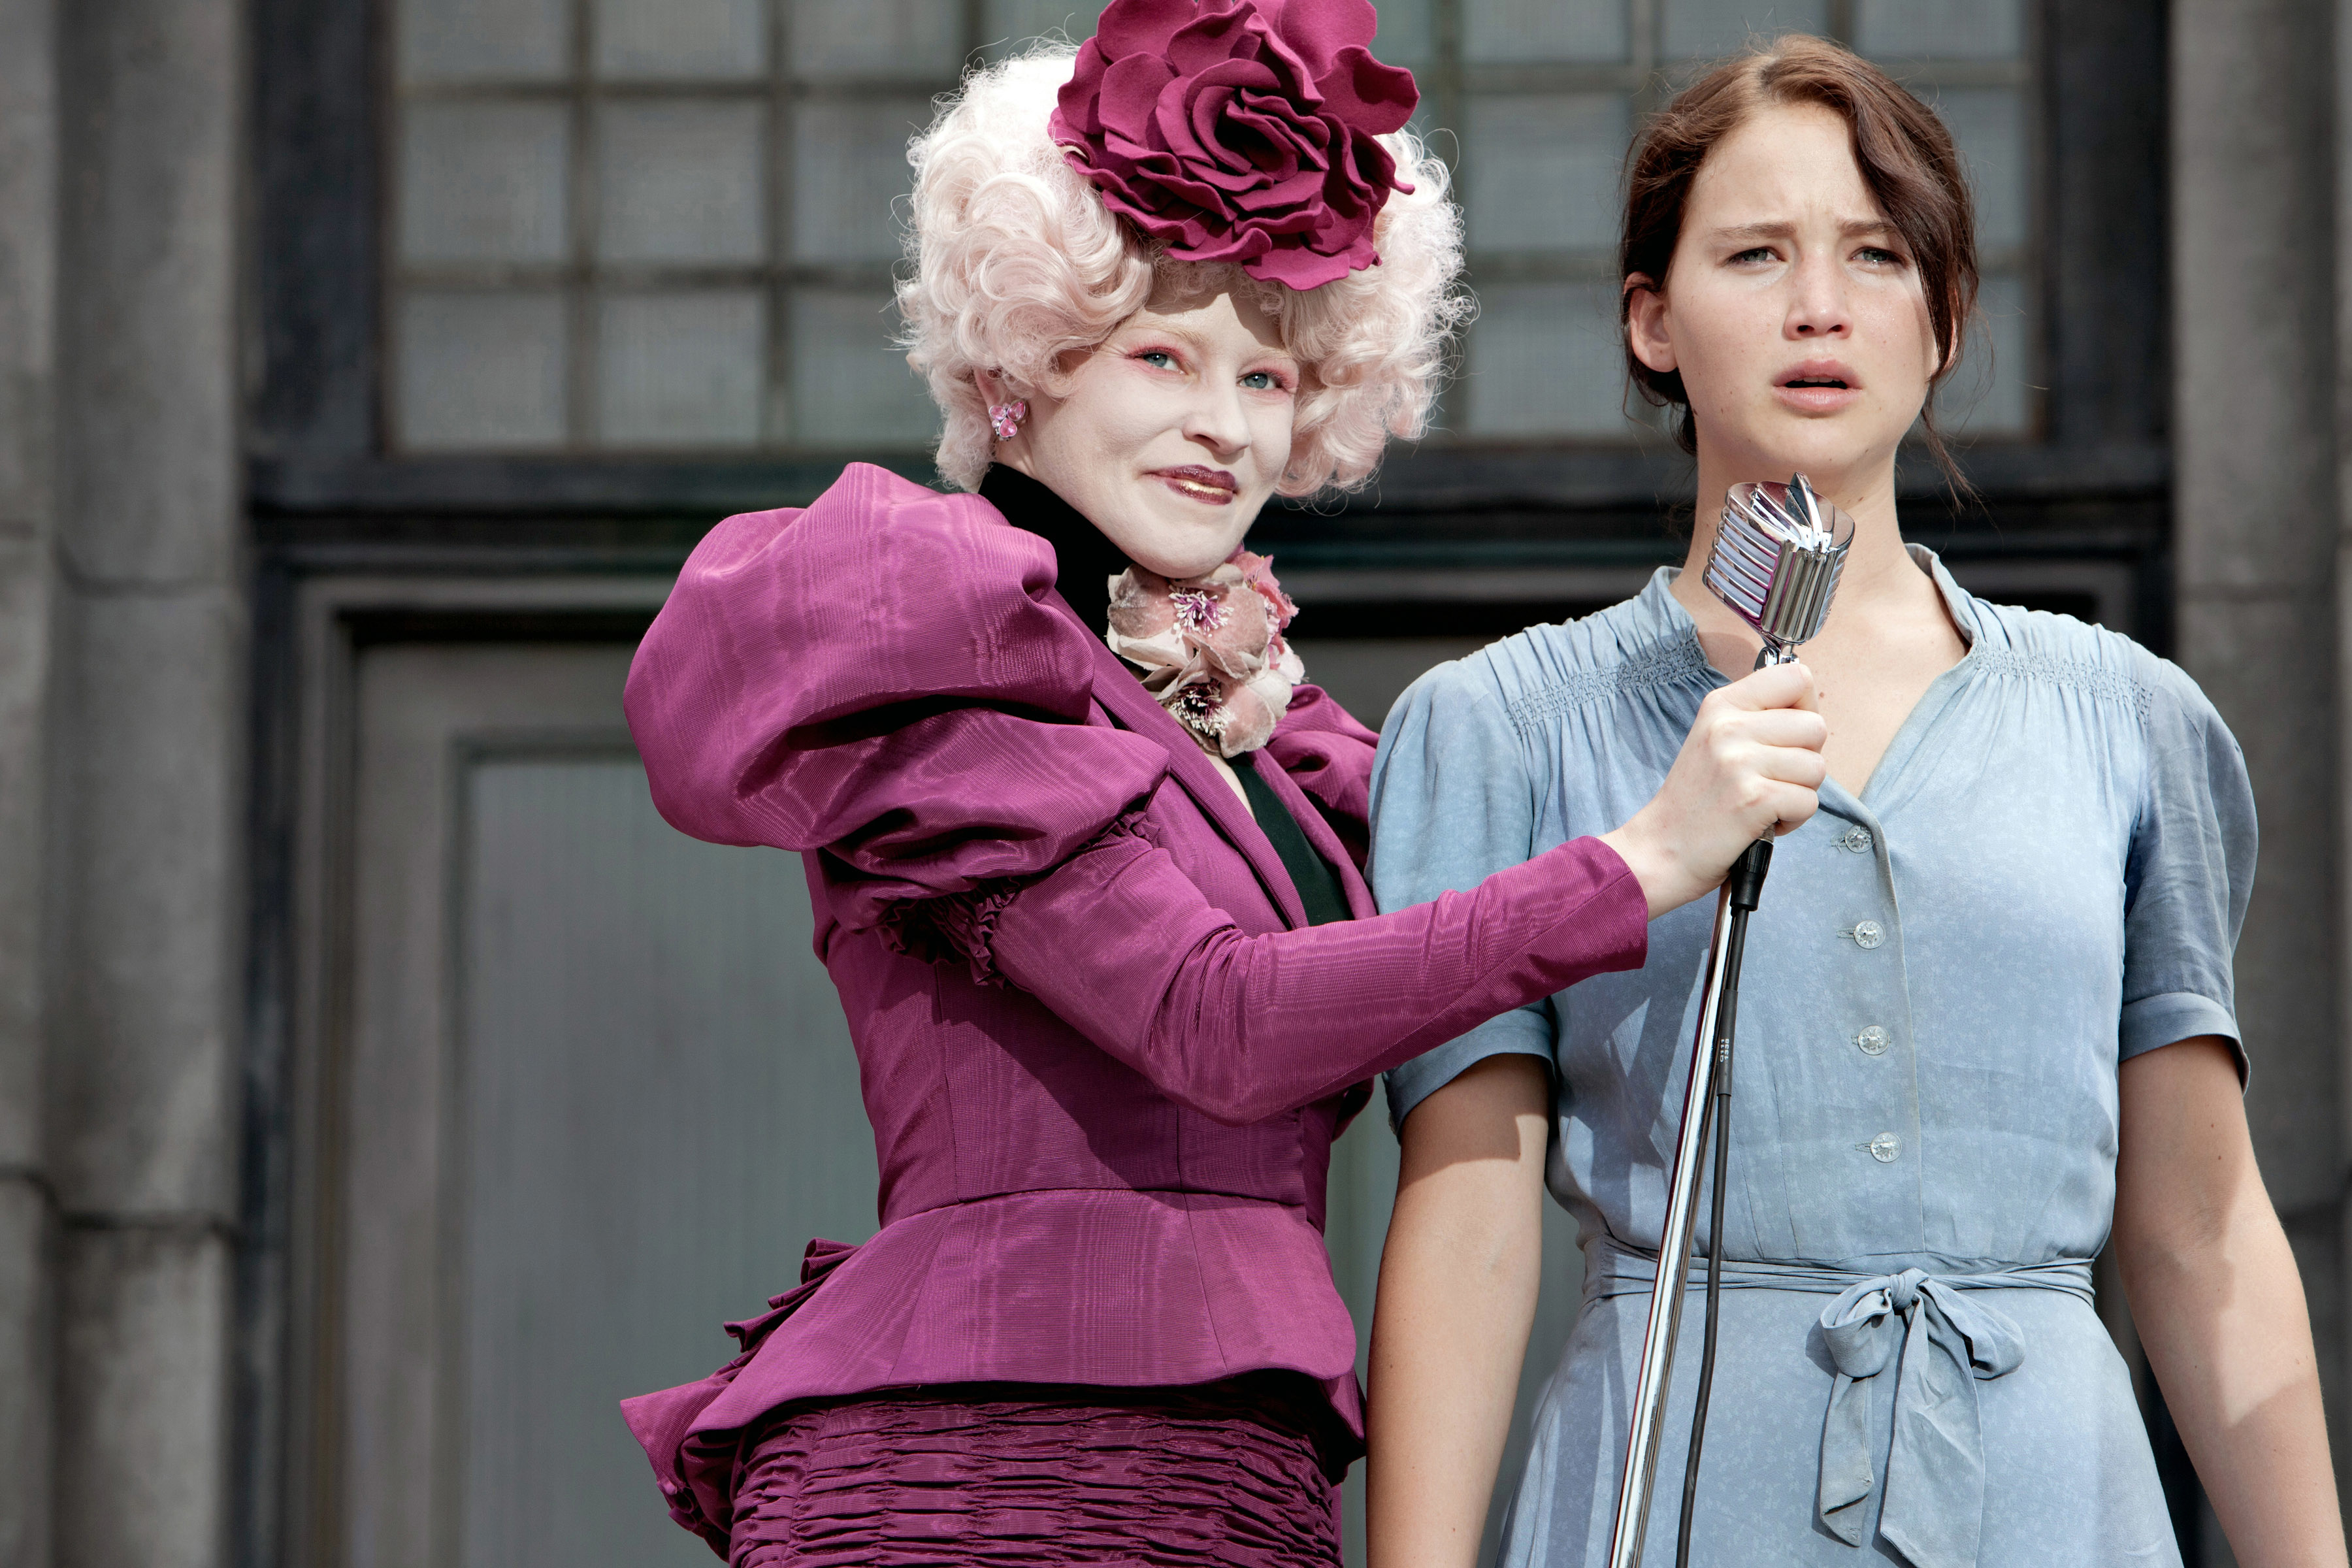 Effie Trinket in an elaborate outfit alongside Katniss Everdeen in a blue dress, both from The Hunger Games